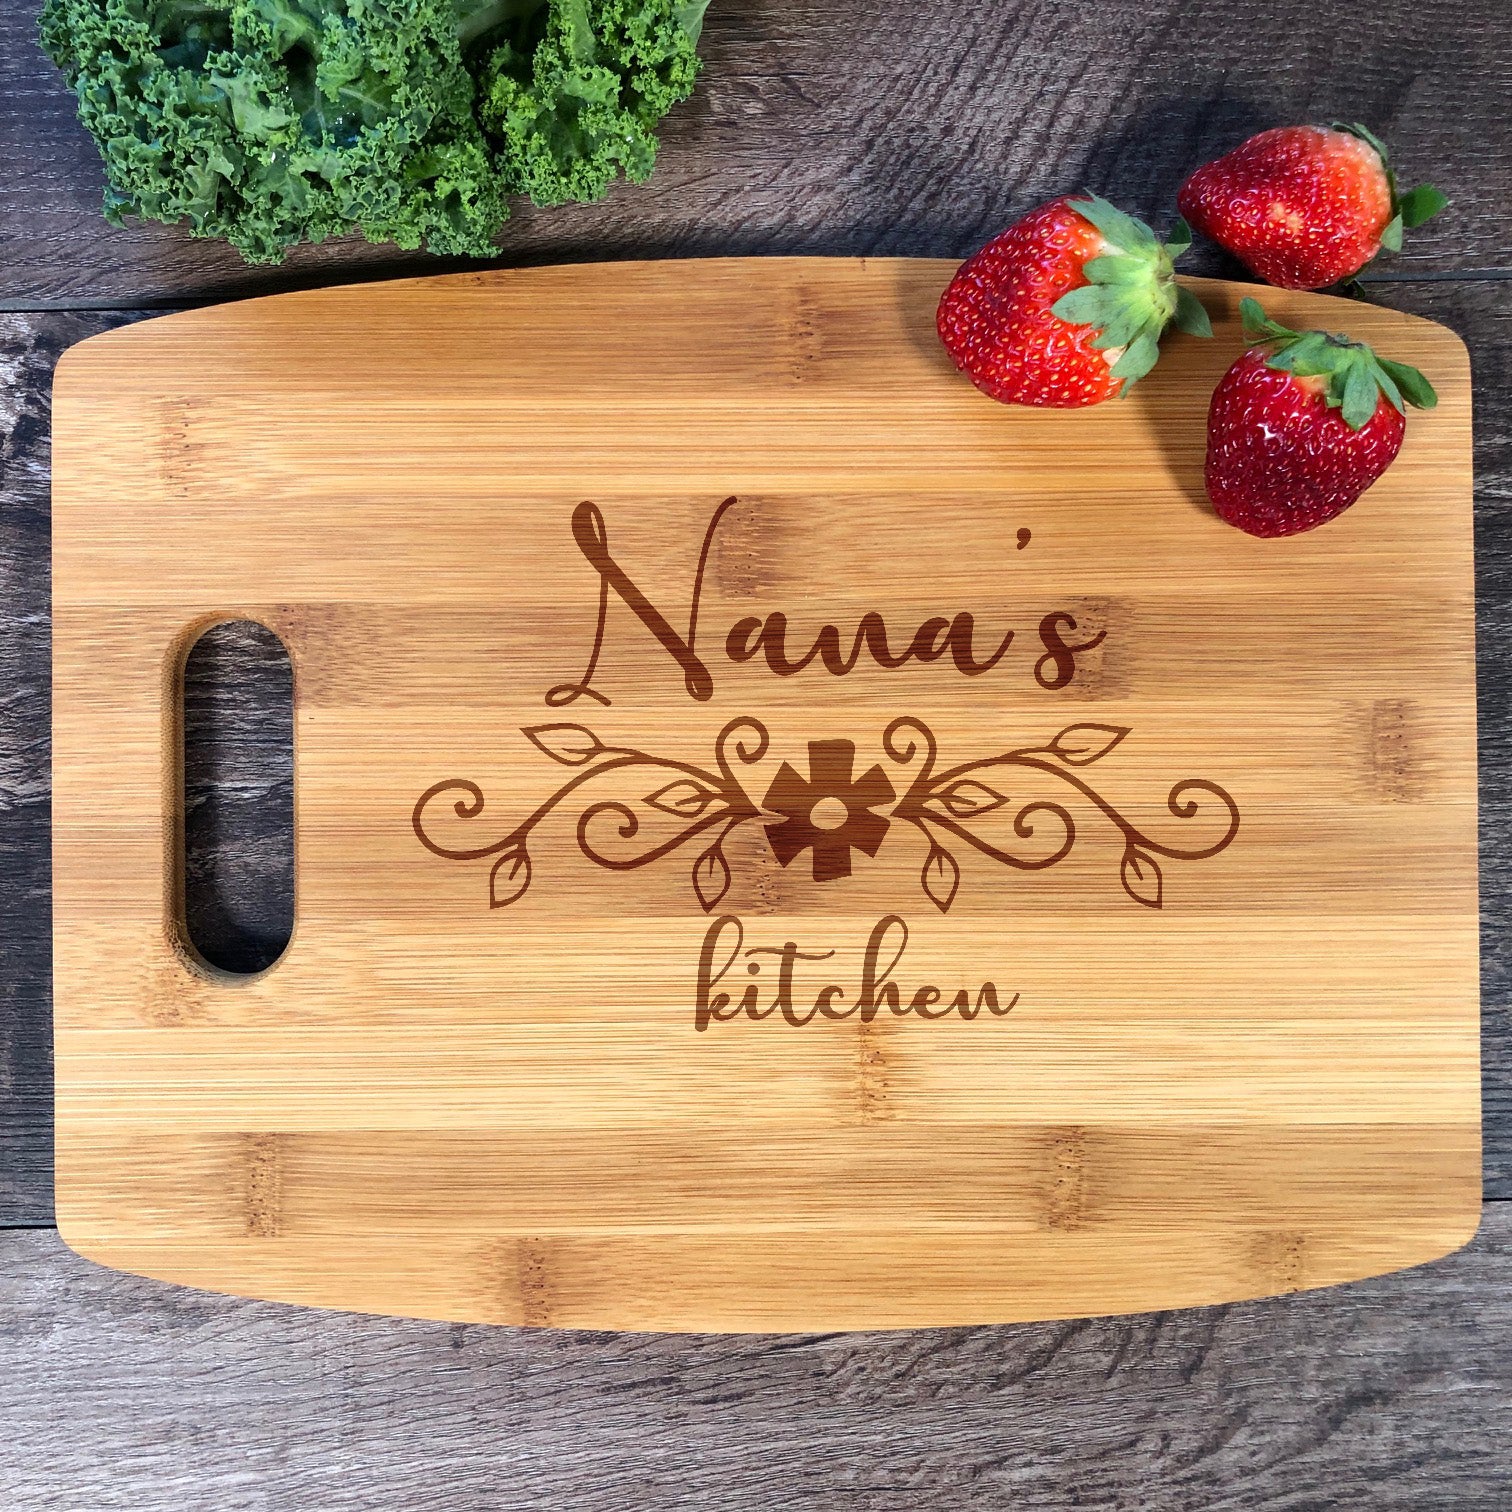 Custom Cutting Board, Grandma's Kitchen, Nanas, Mom's, or Any Personalized  Name. Engraved Wood Chopping Block, Gifts for Family or Friends. 